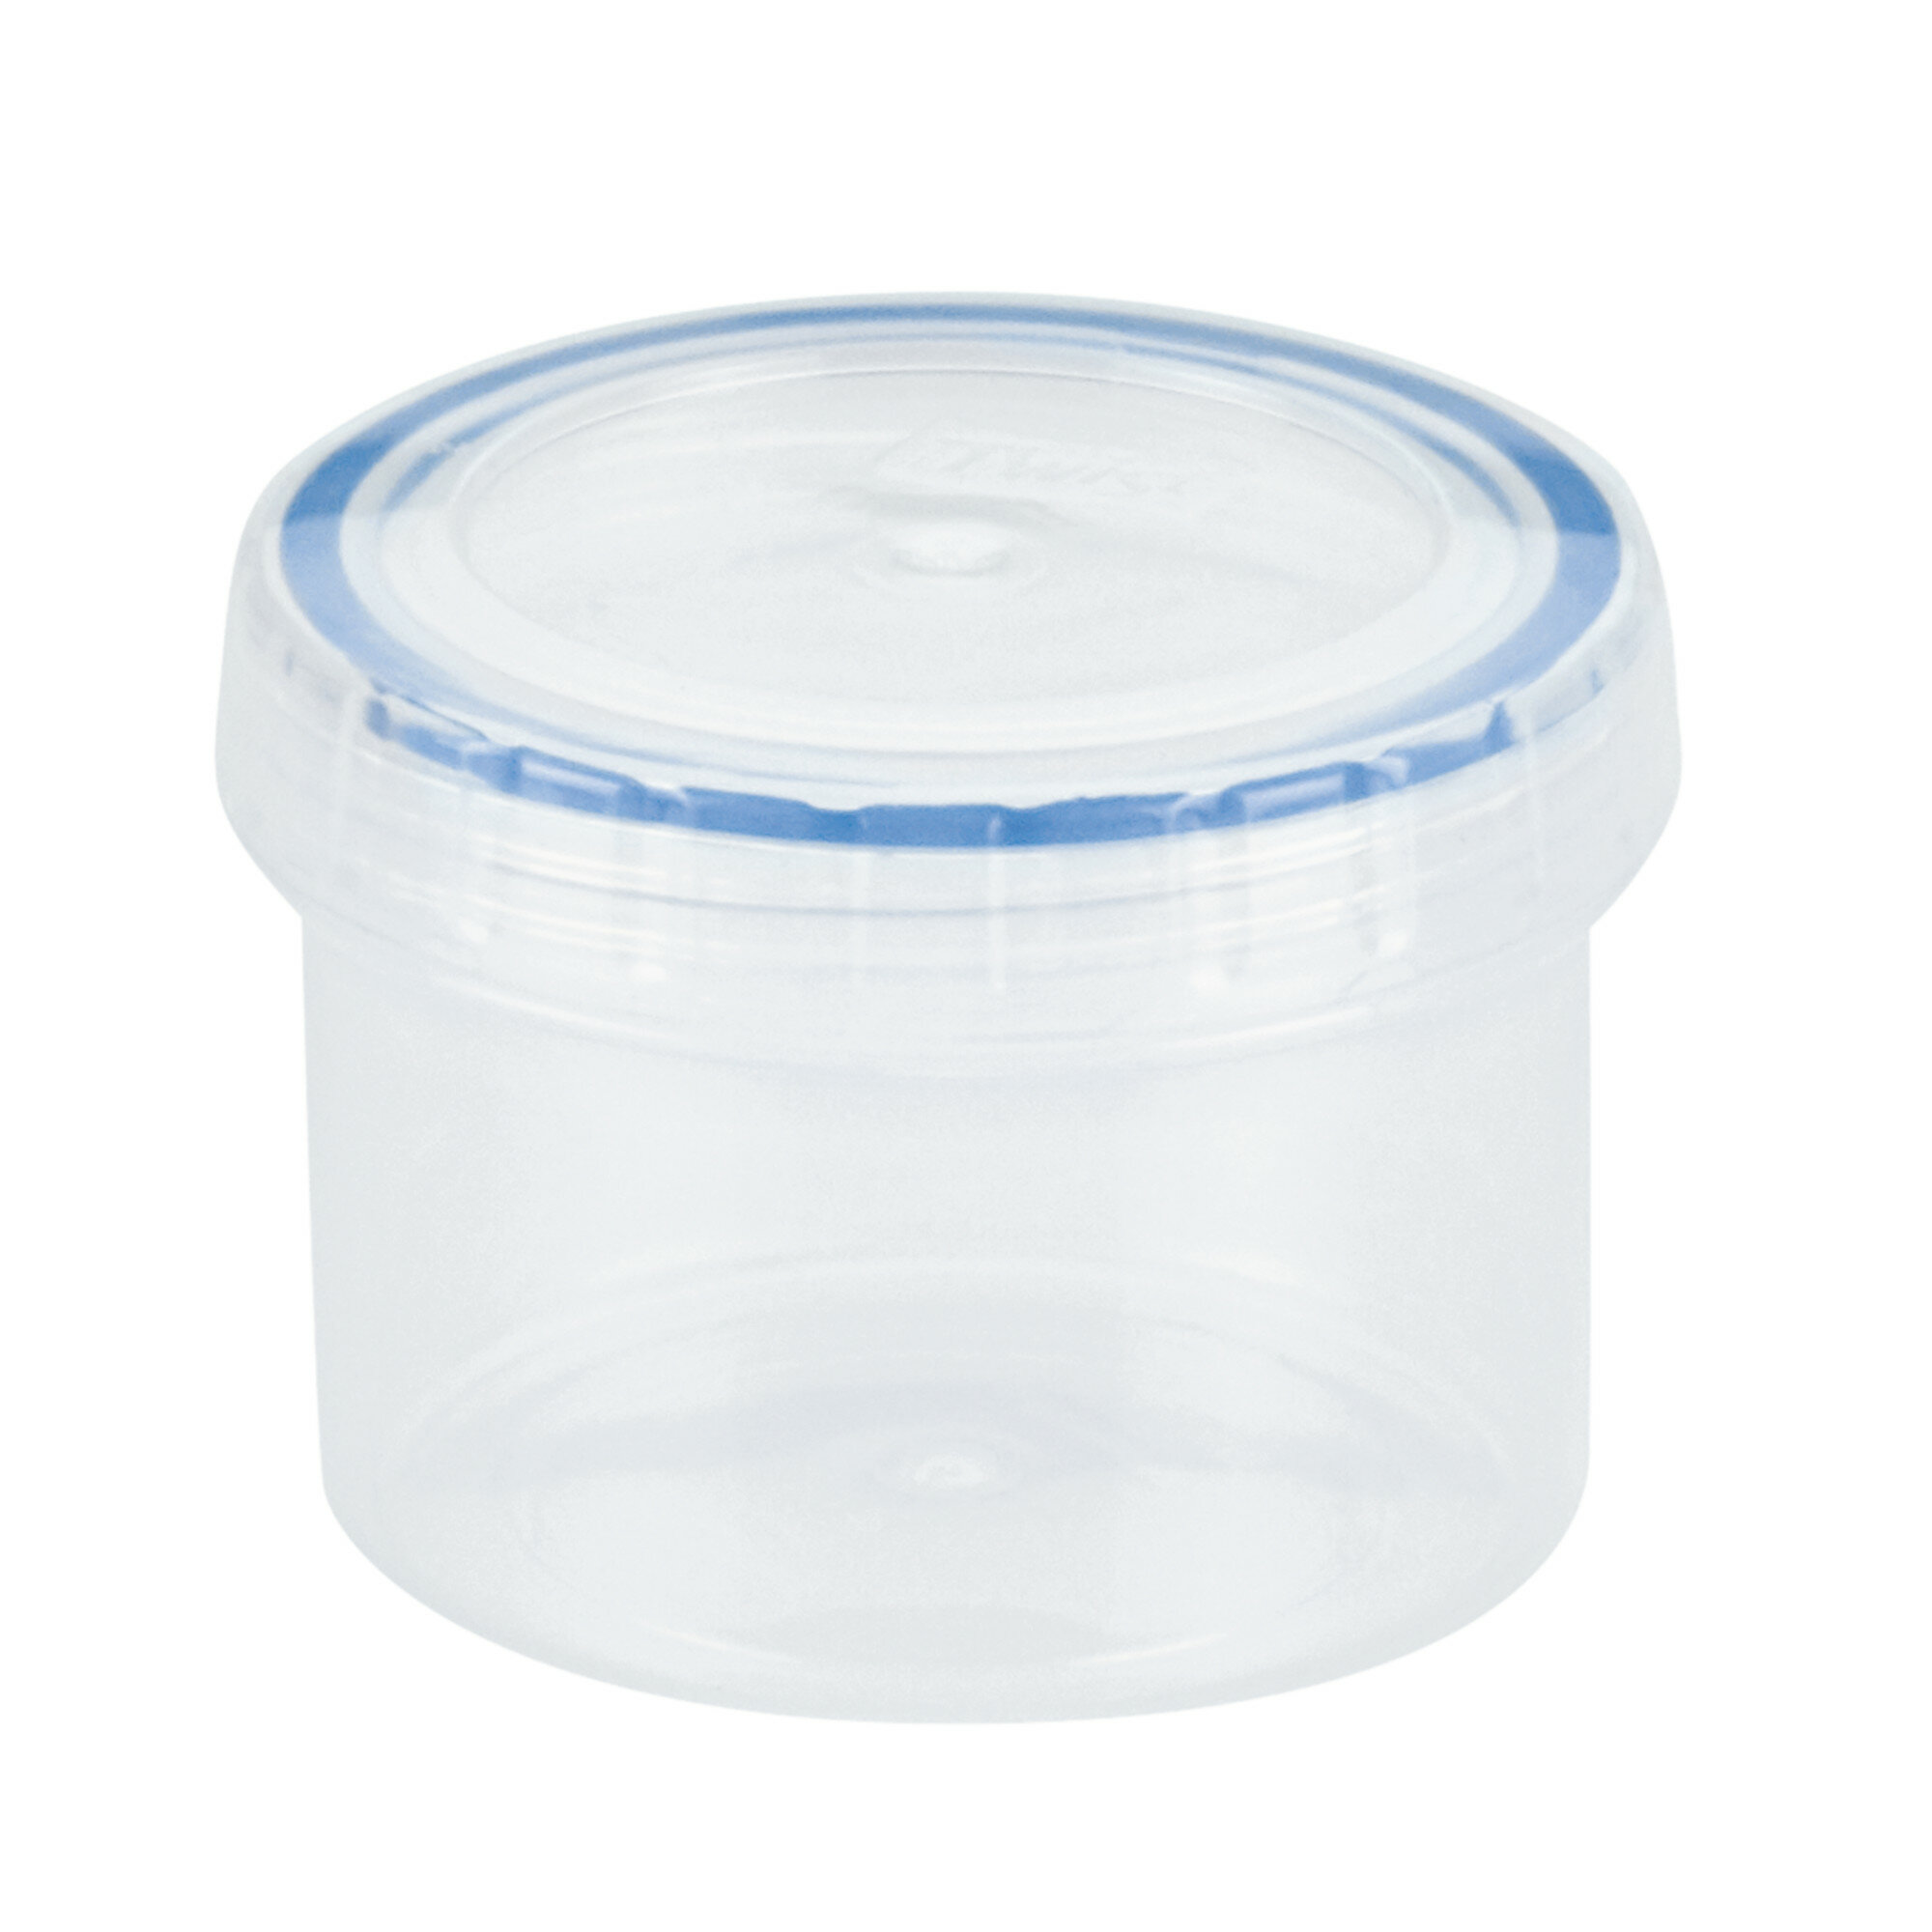 Freezer Soup Food Storage Containers With Screw On lids 32 Oz - 10